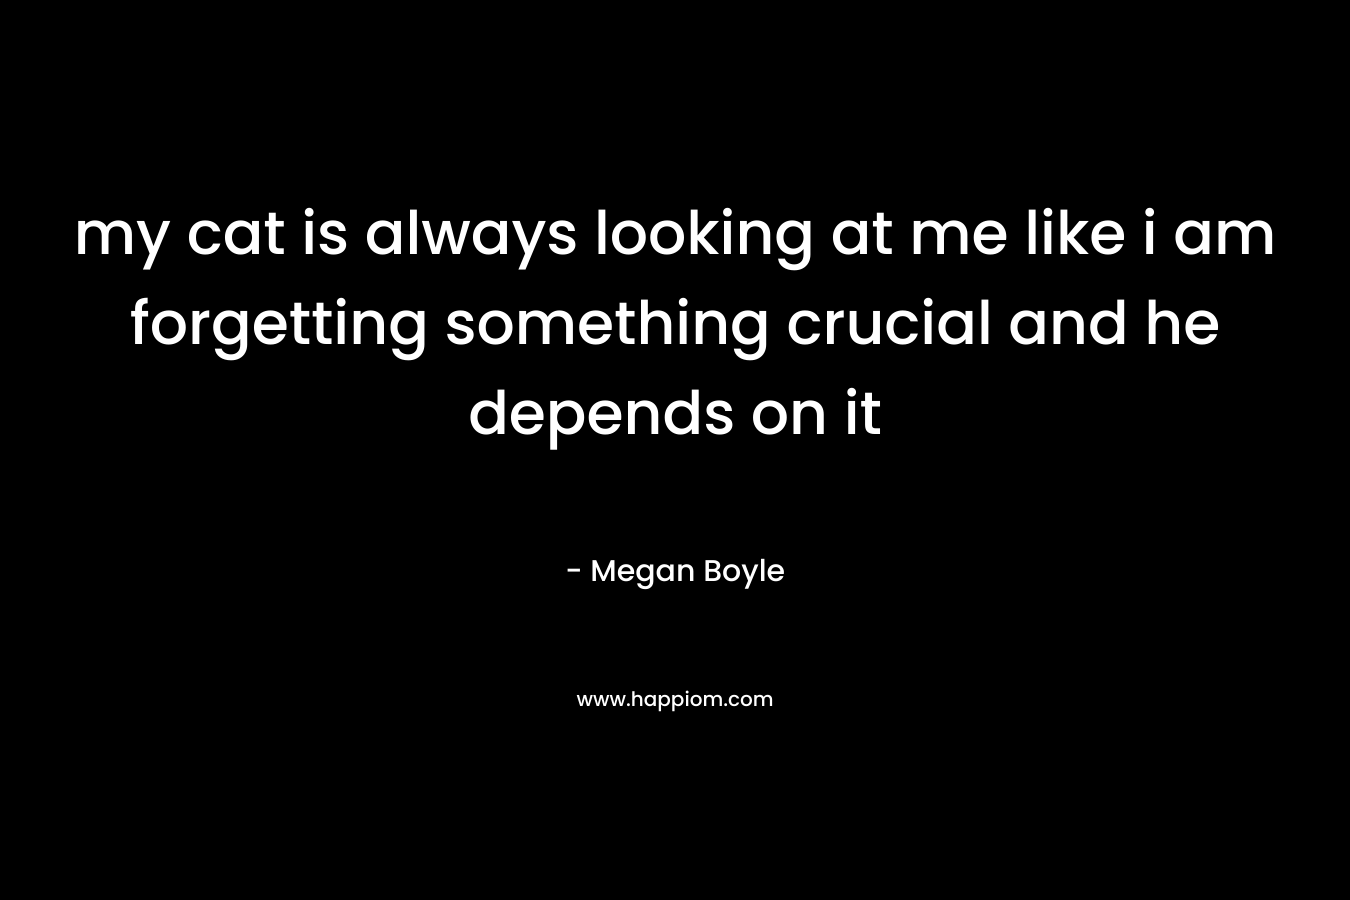 my cat is always looking at me like i am forgetting something crucial and he depends on it – Megan Boyle